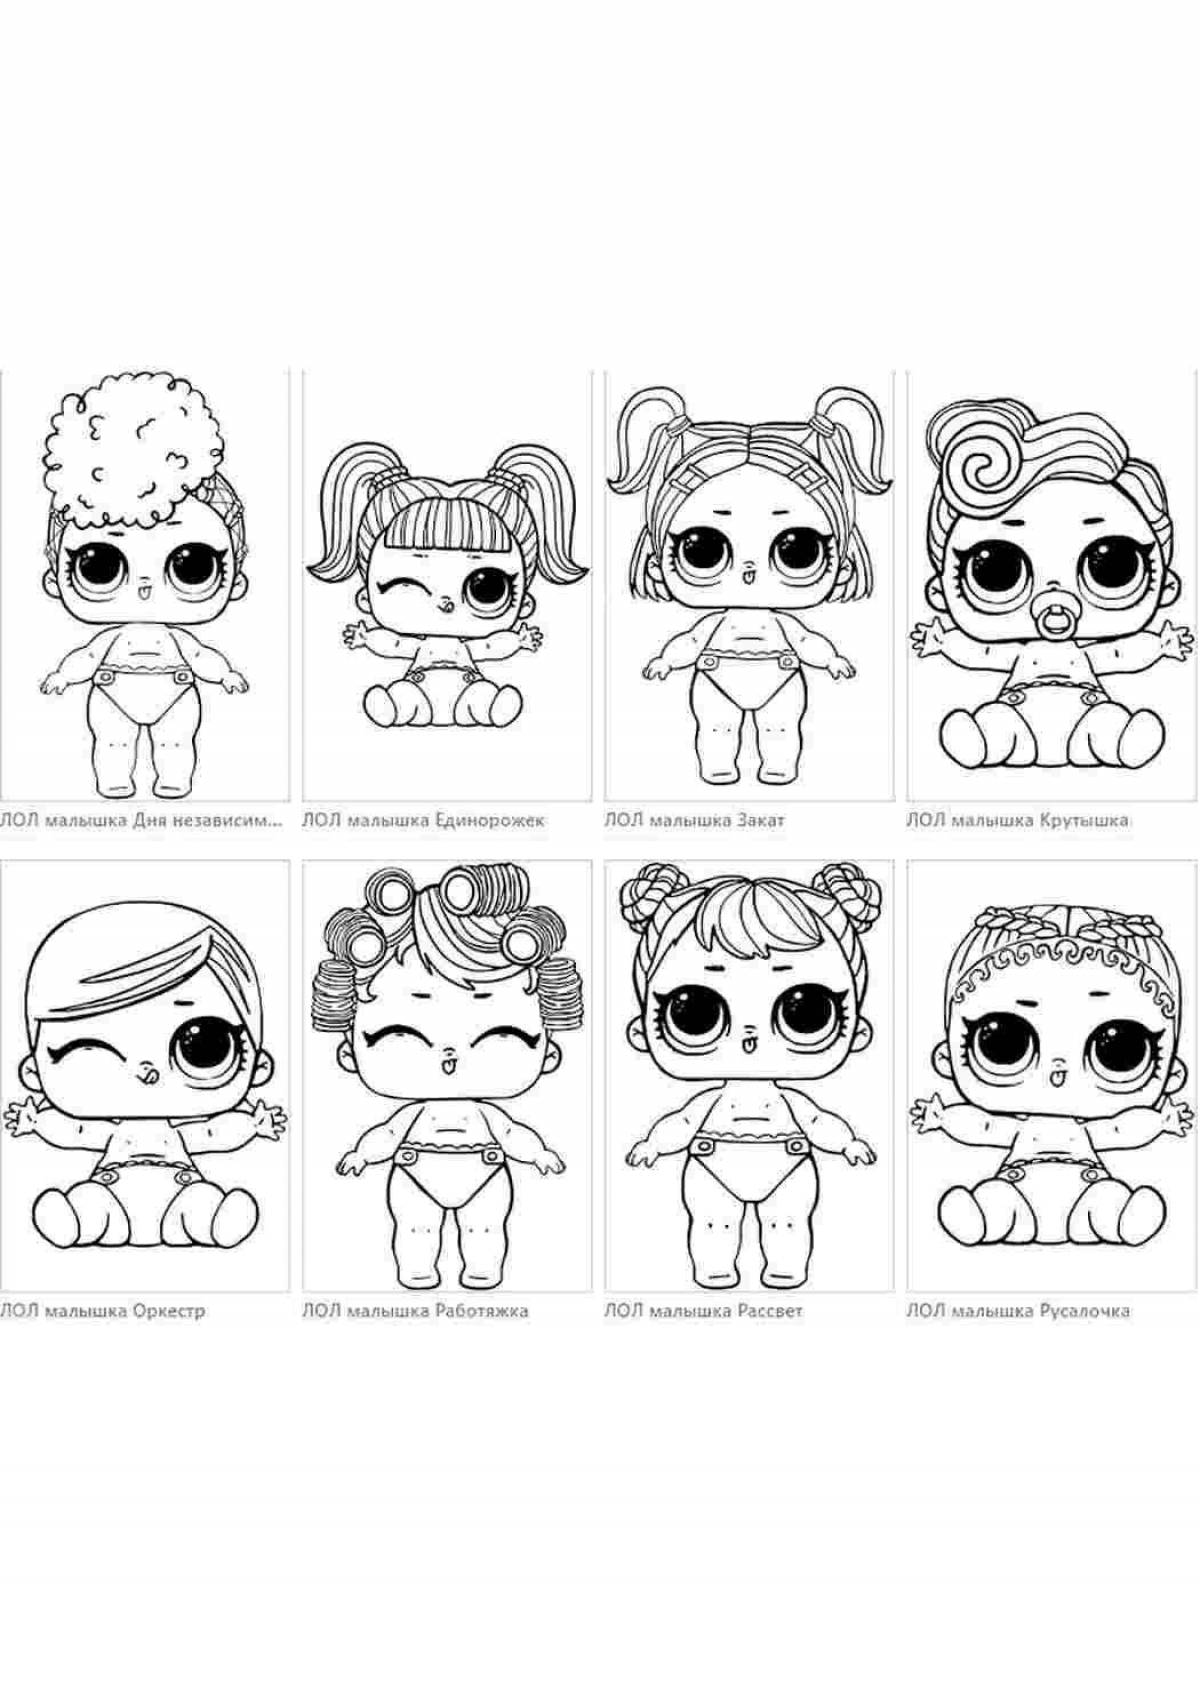 Adorable little lol doll coloring book